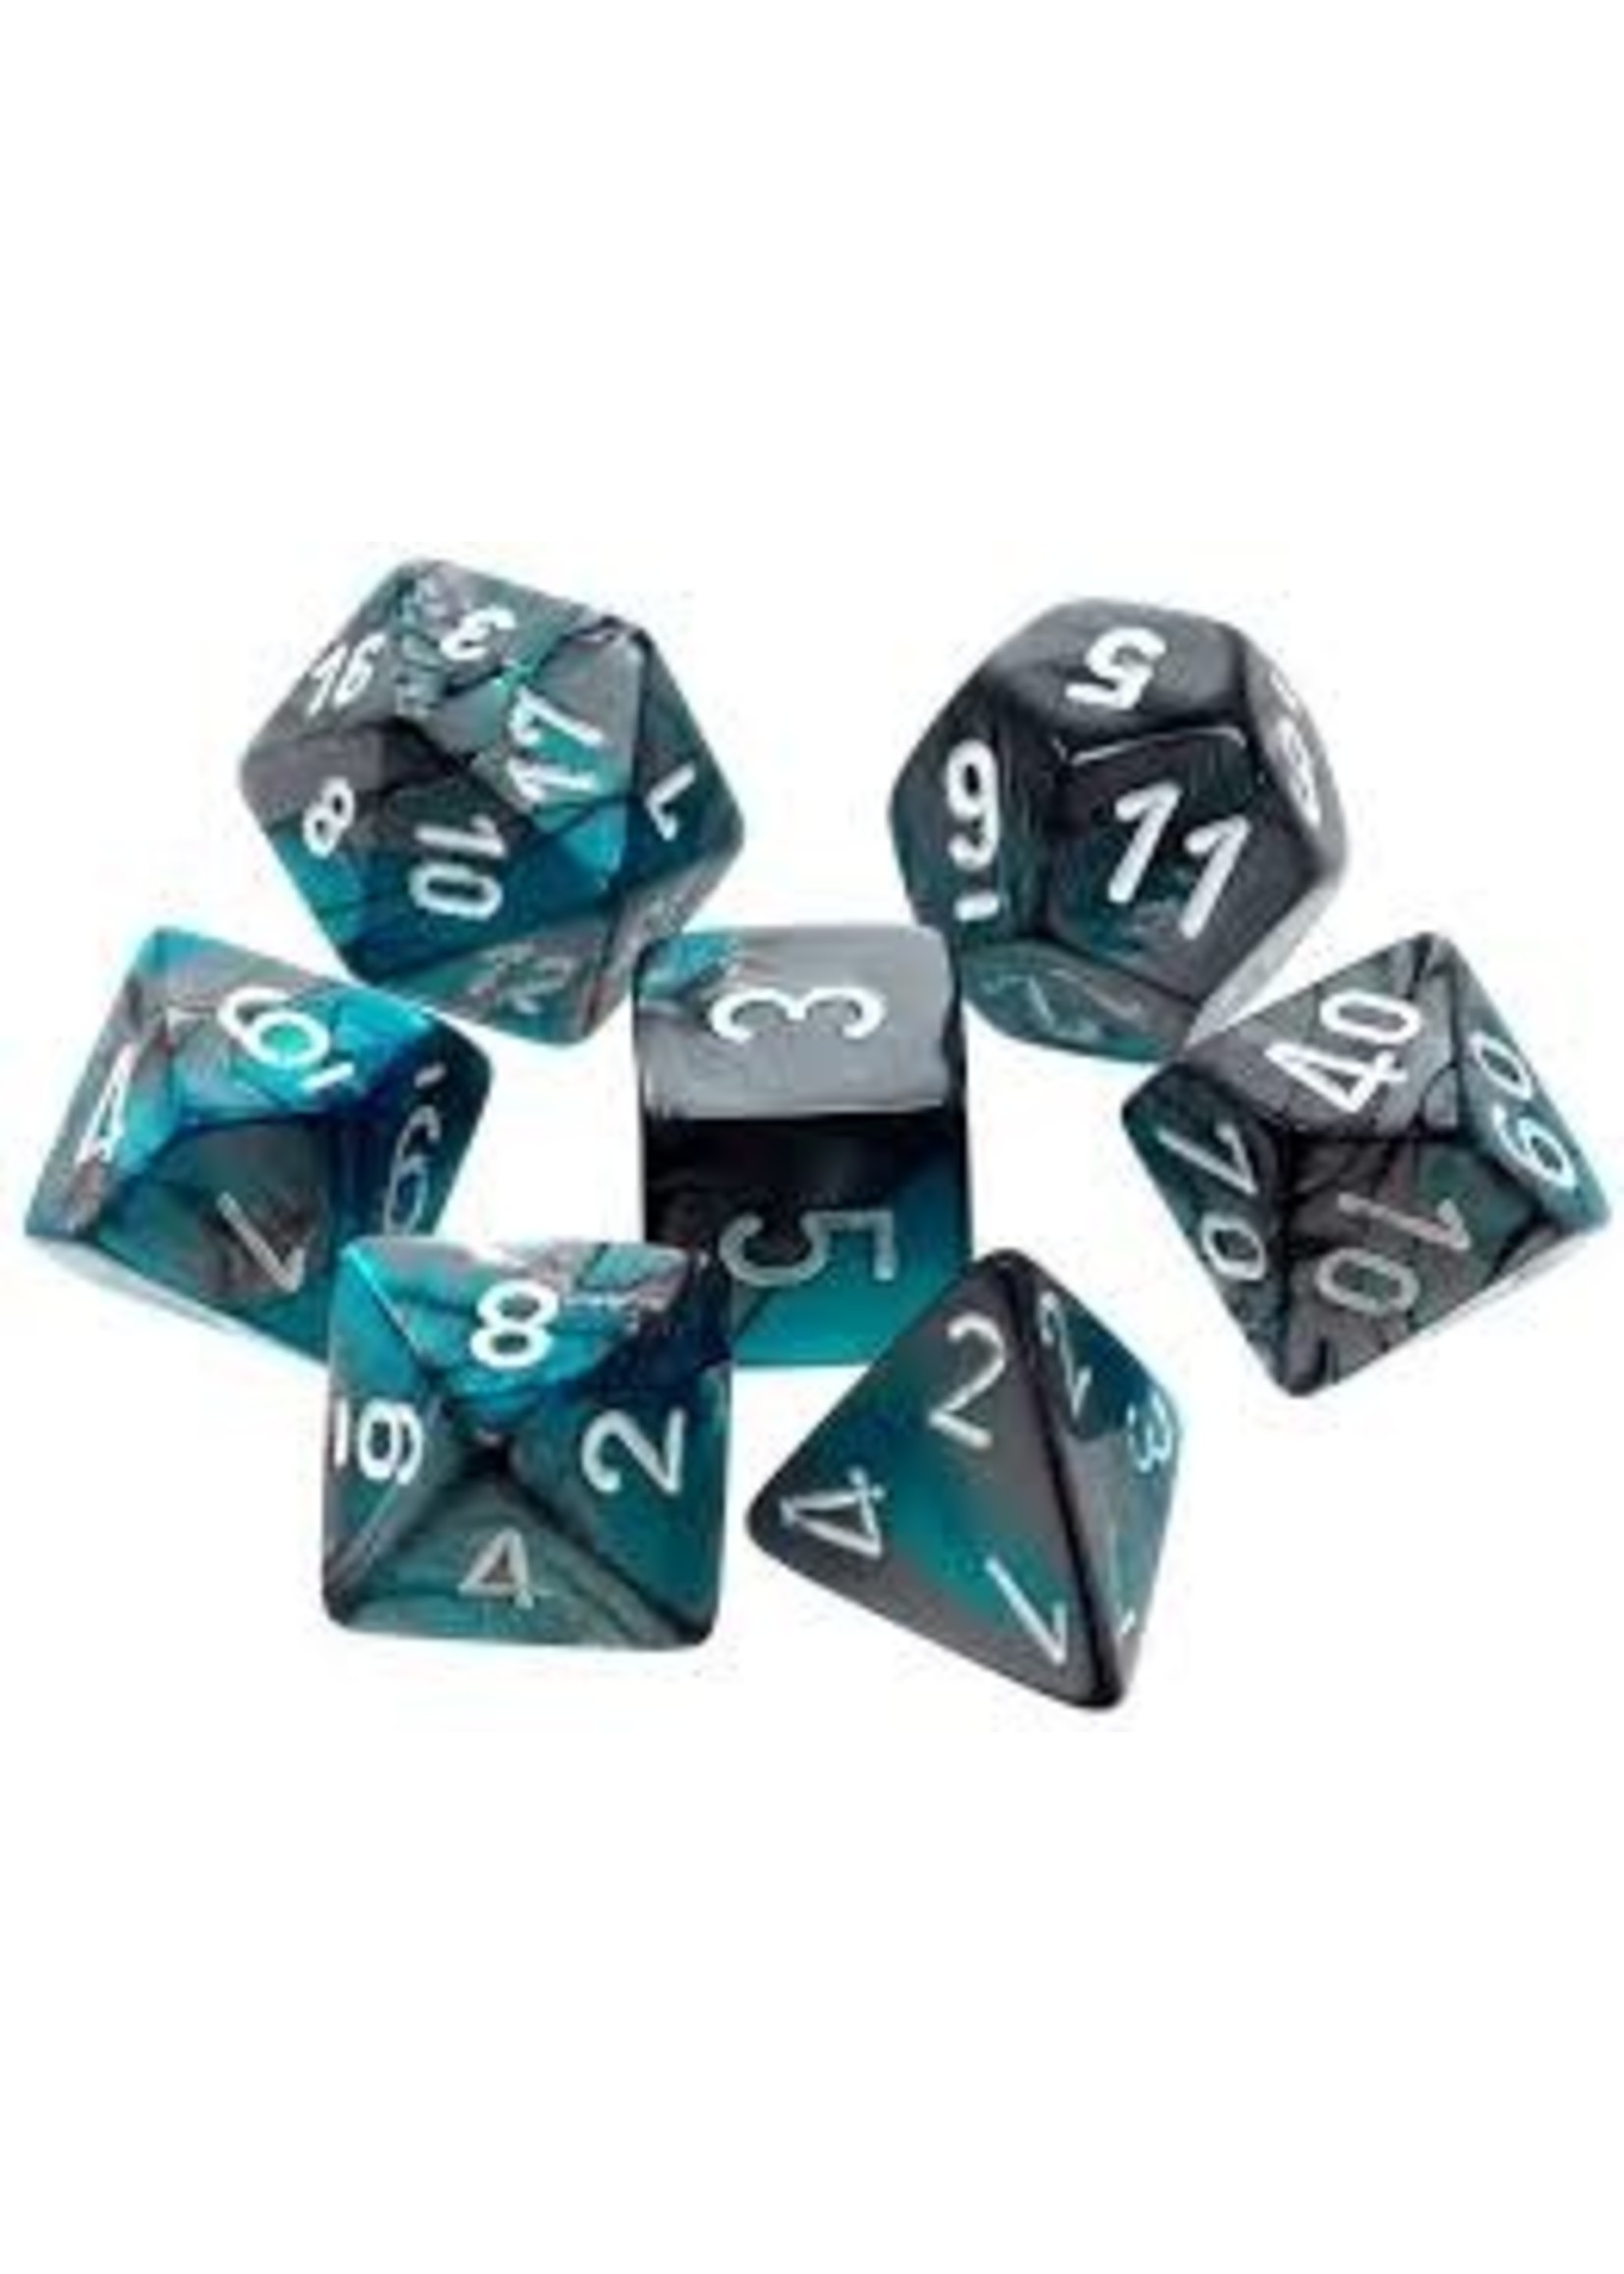 Chessex Gemini Poly 7 set:  Steel & Teal w/ White